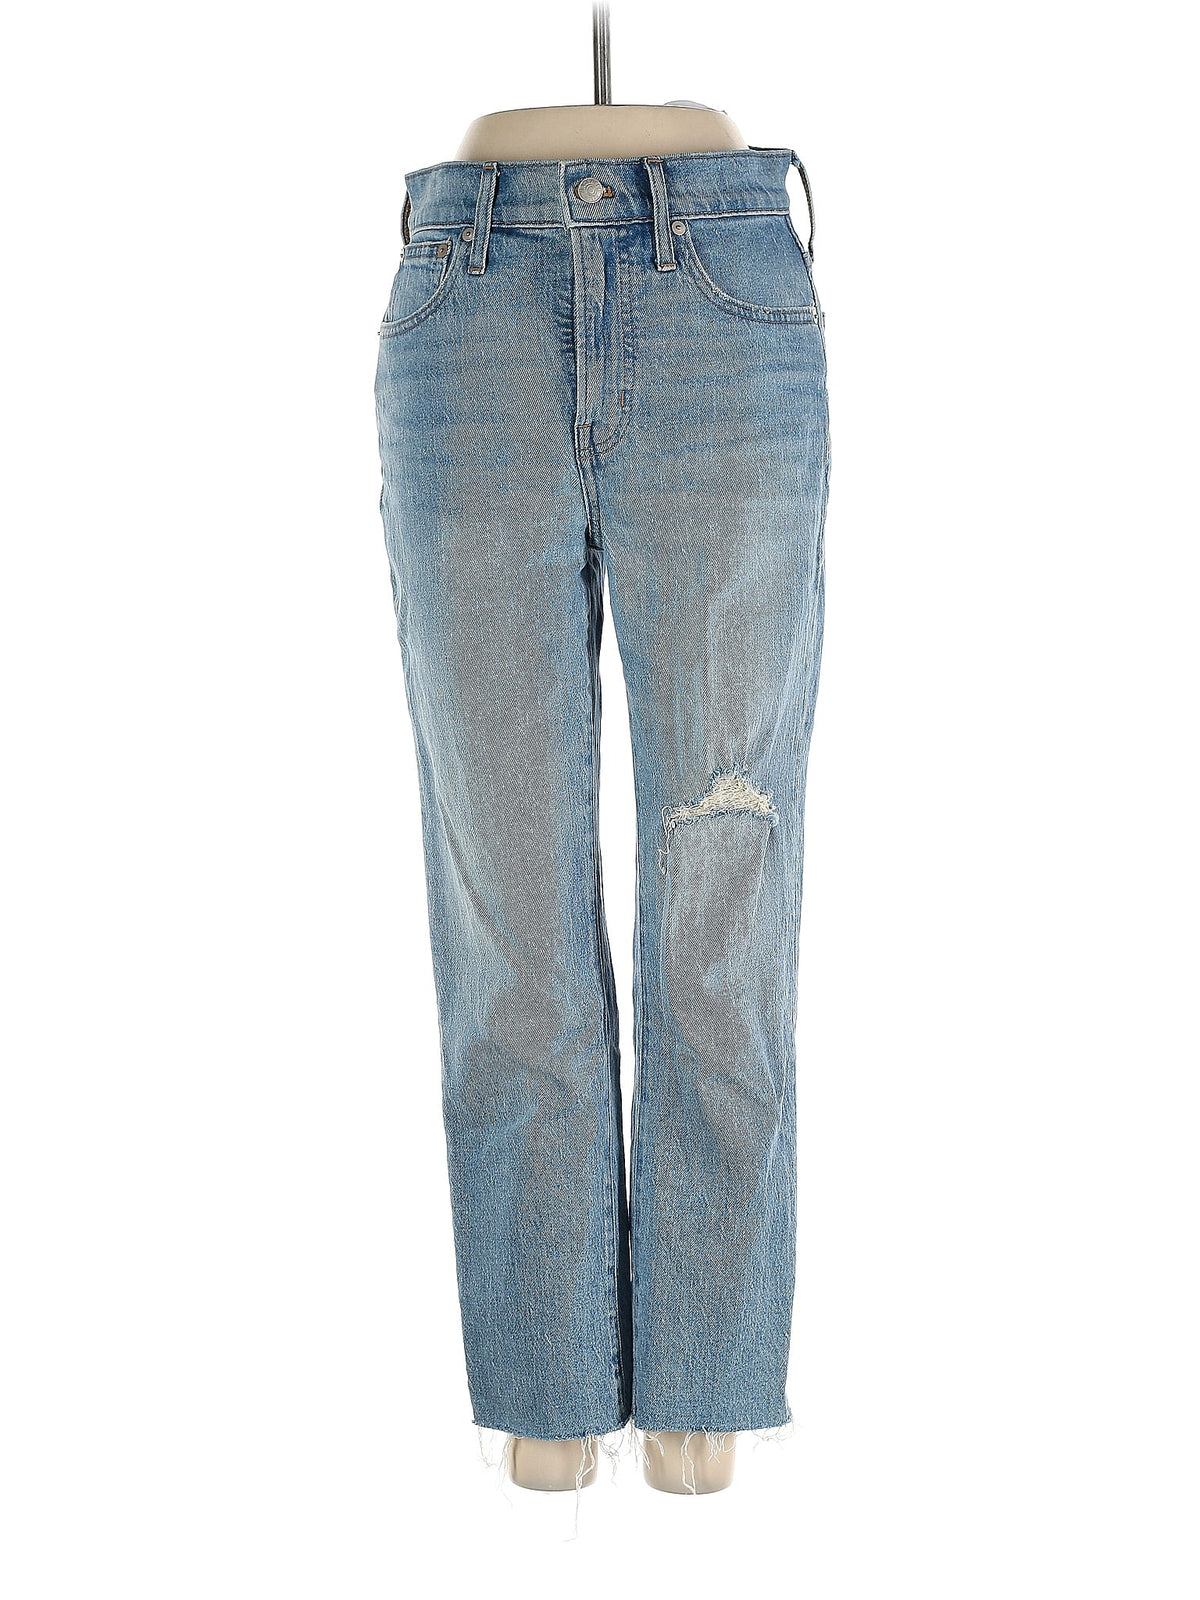 Mid-Rise Straight-leg Jeans in Light Wash waist size - 25 P